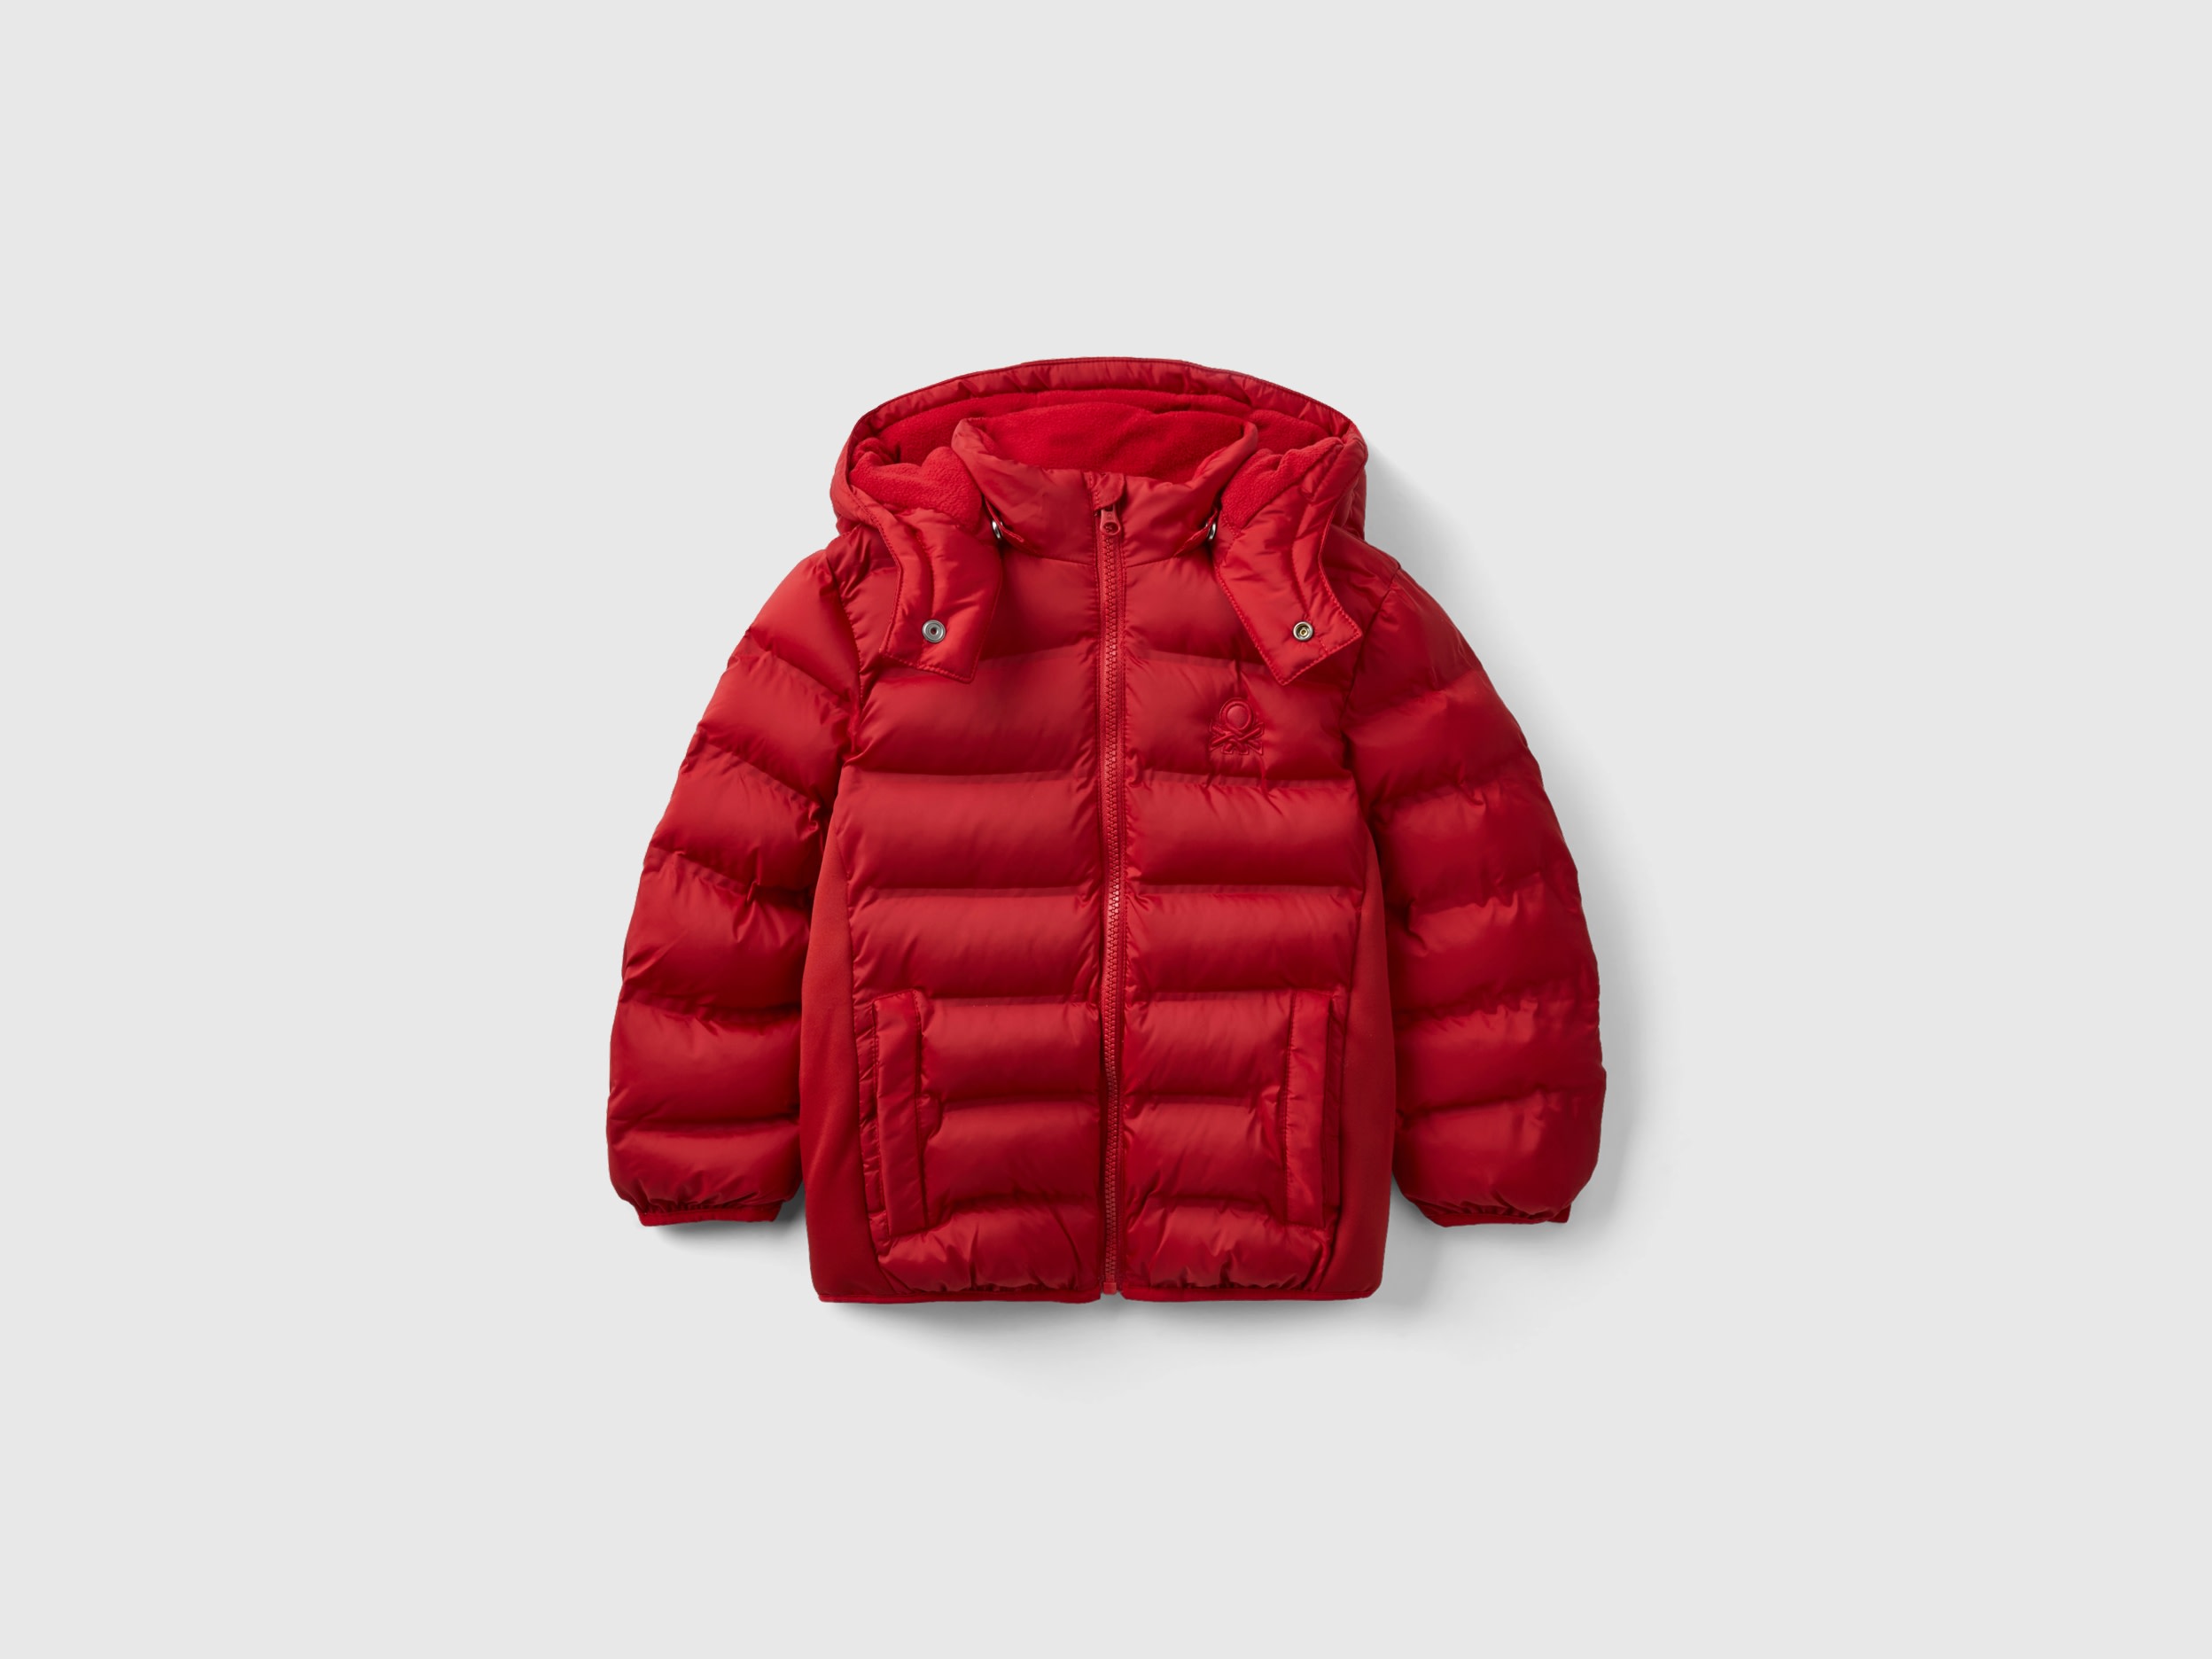 Benetton, Jacket With Neoprene Details, size 12-18, Red, Kids